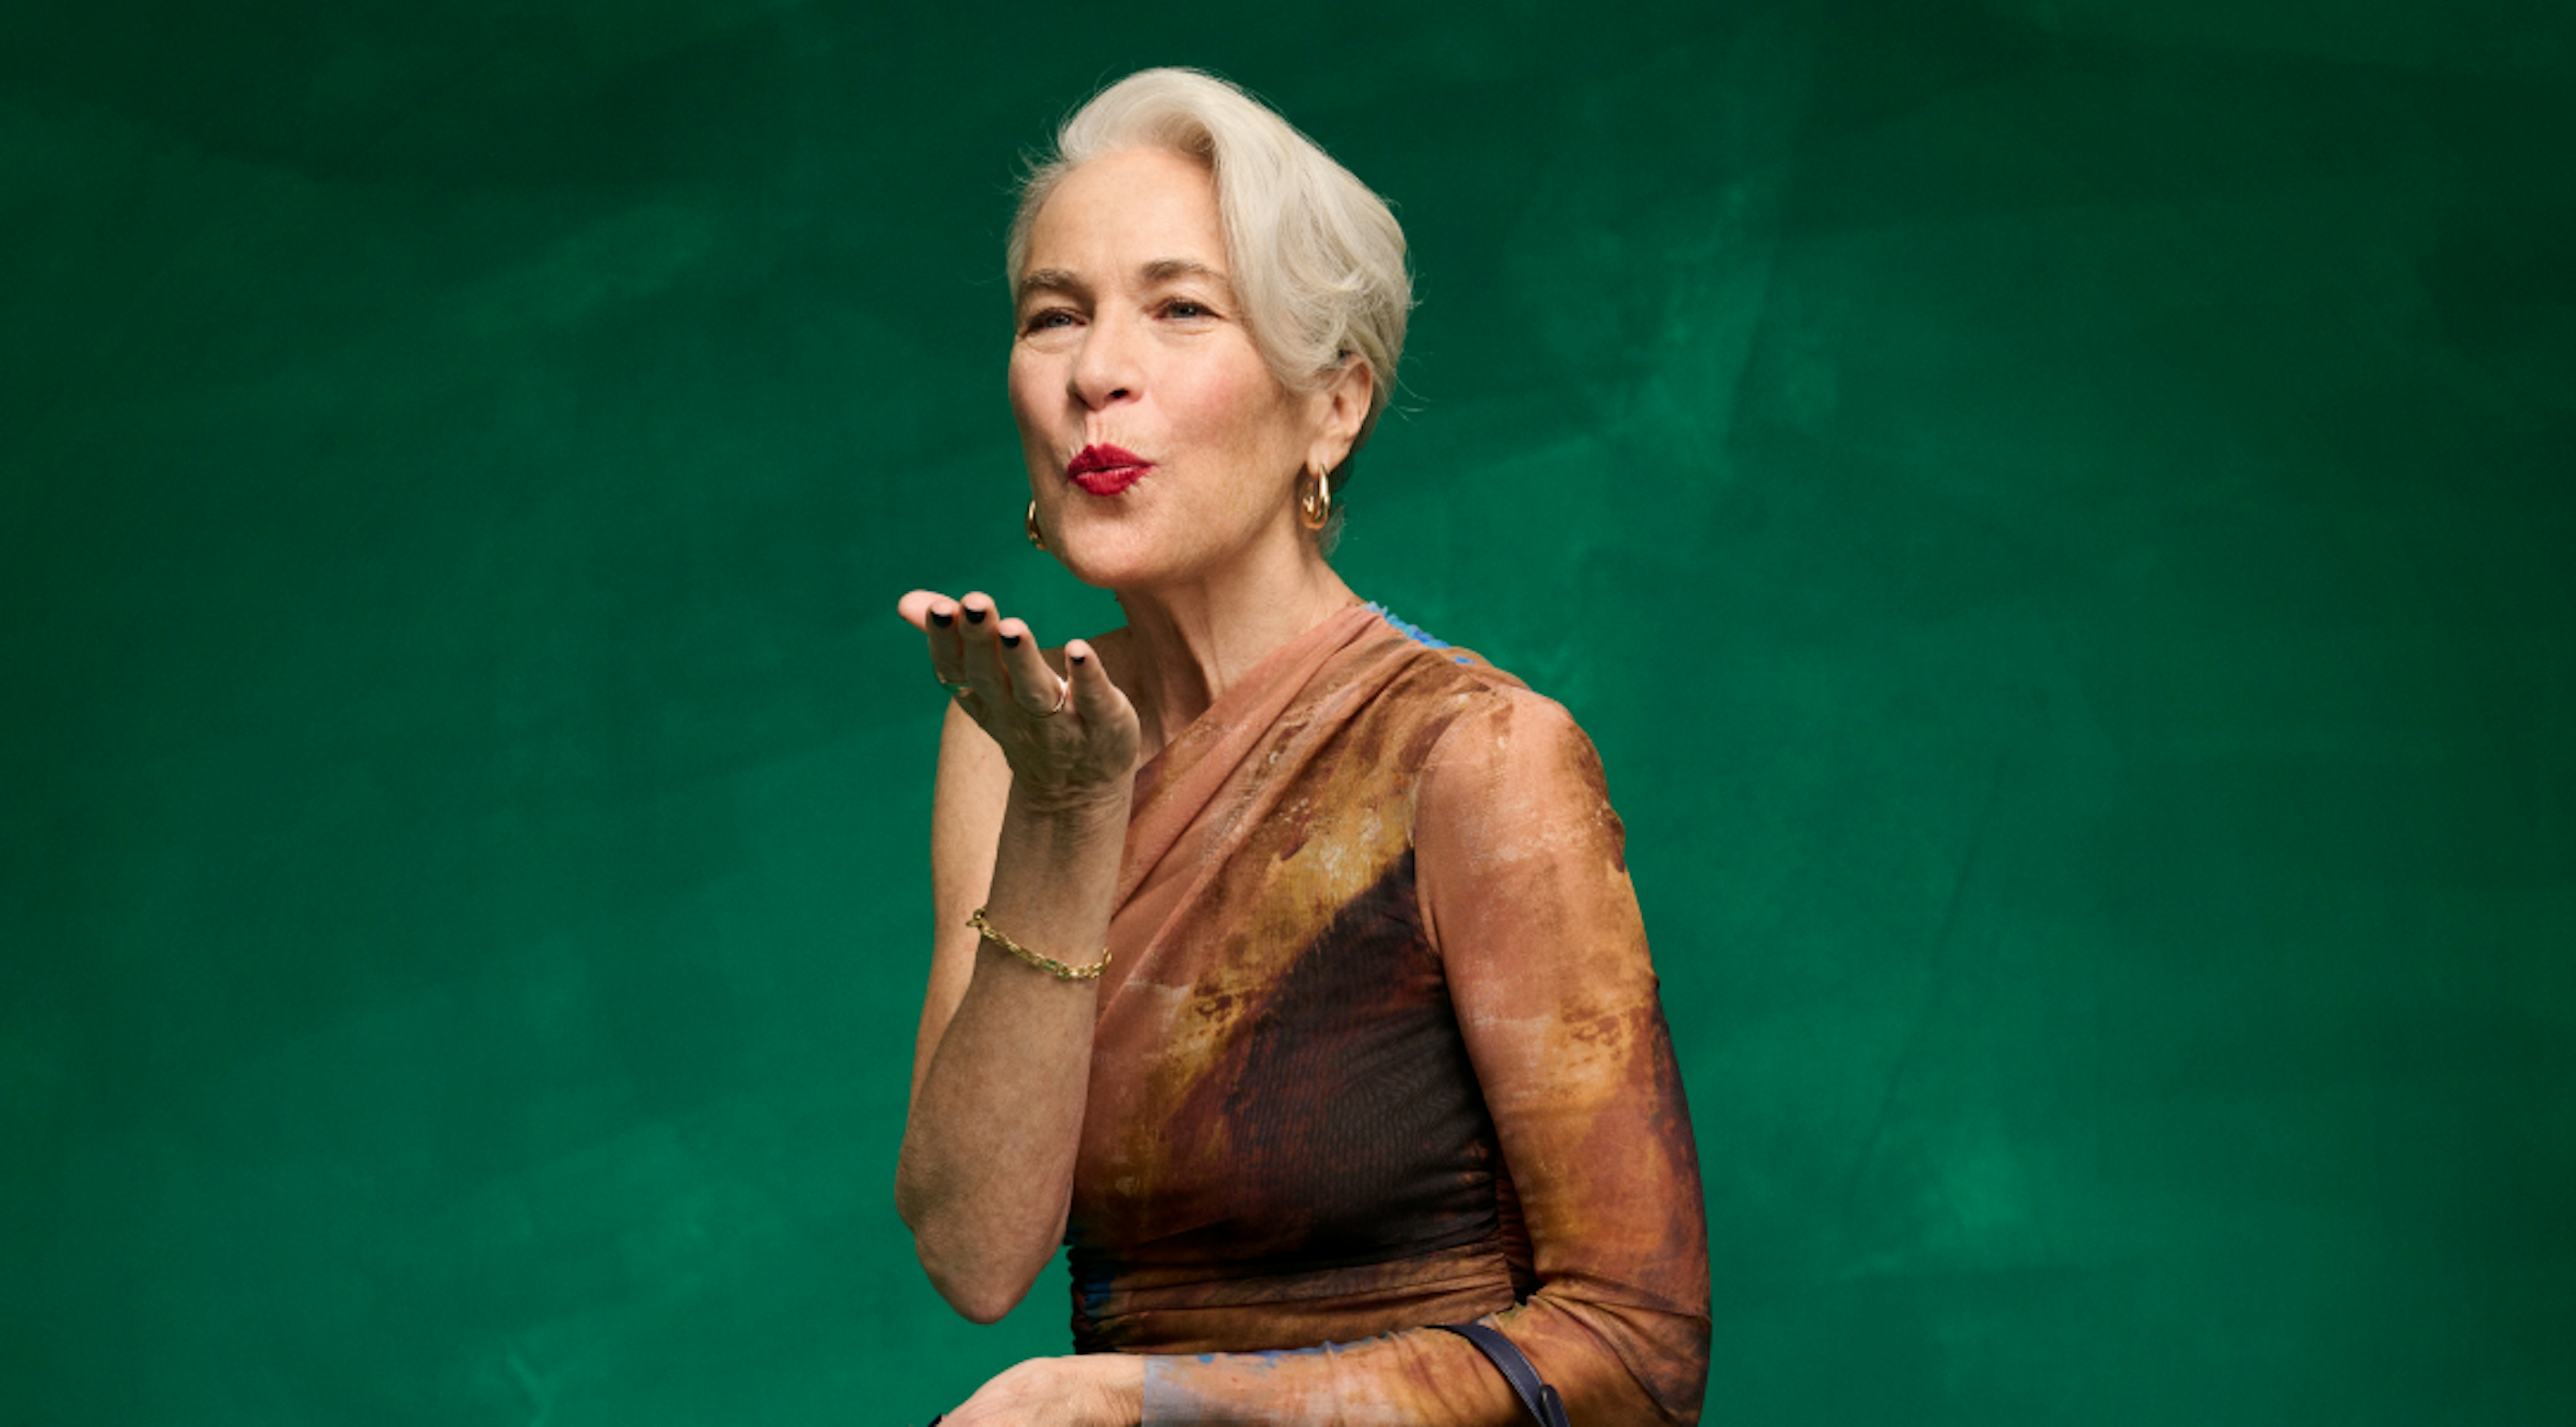 The image shows an older lady dressed in a brown casual dress situated in a green painted studio background. She is blowing a kiss to the camera.